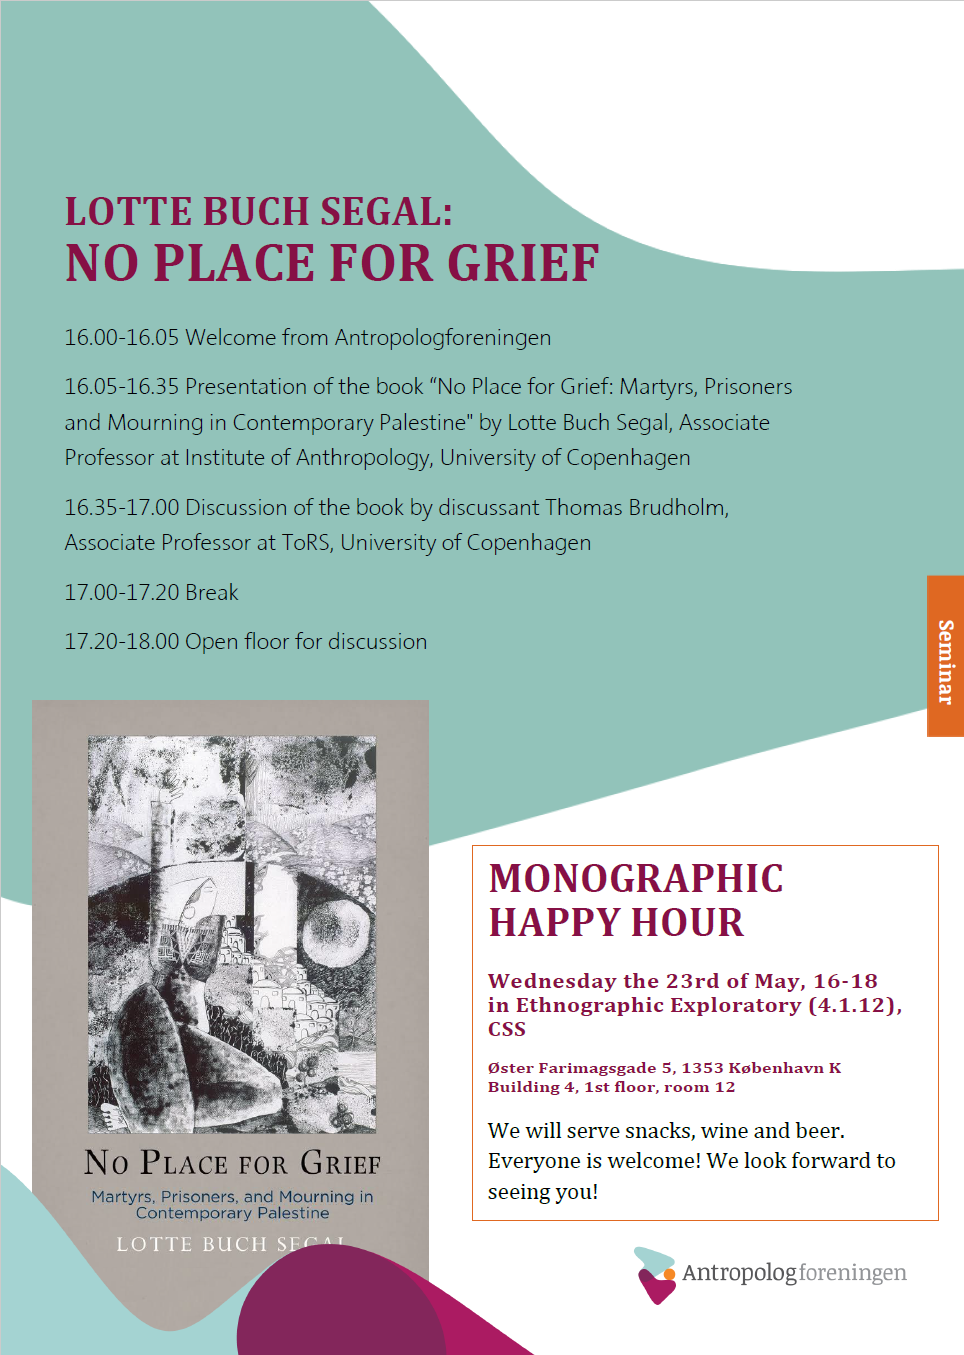 MONOGRAPHIC HAPPY HOUR with Lotte Buch Segal